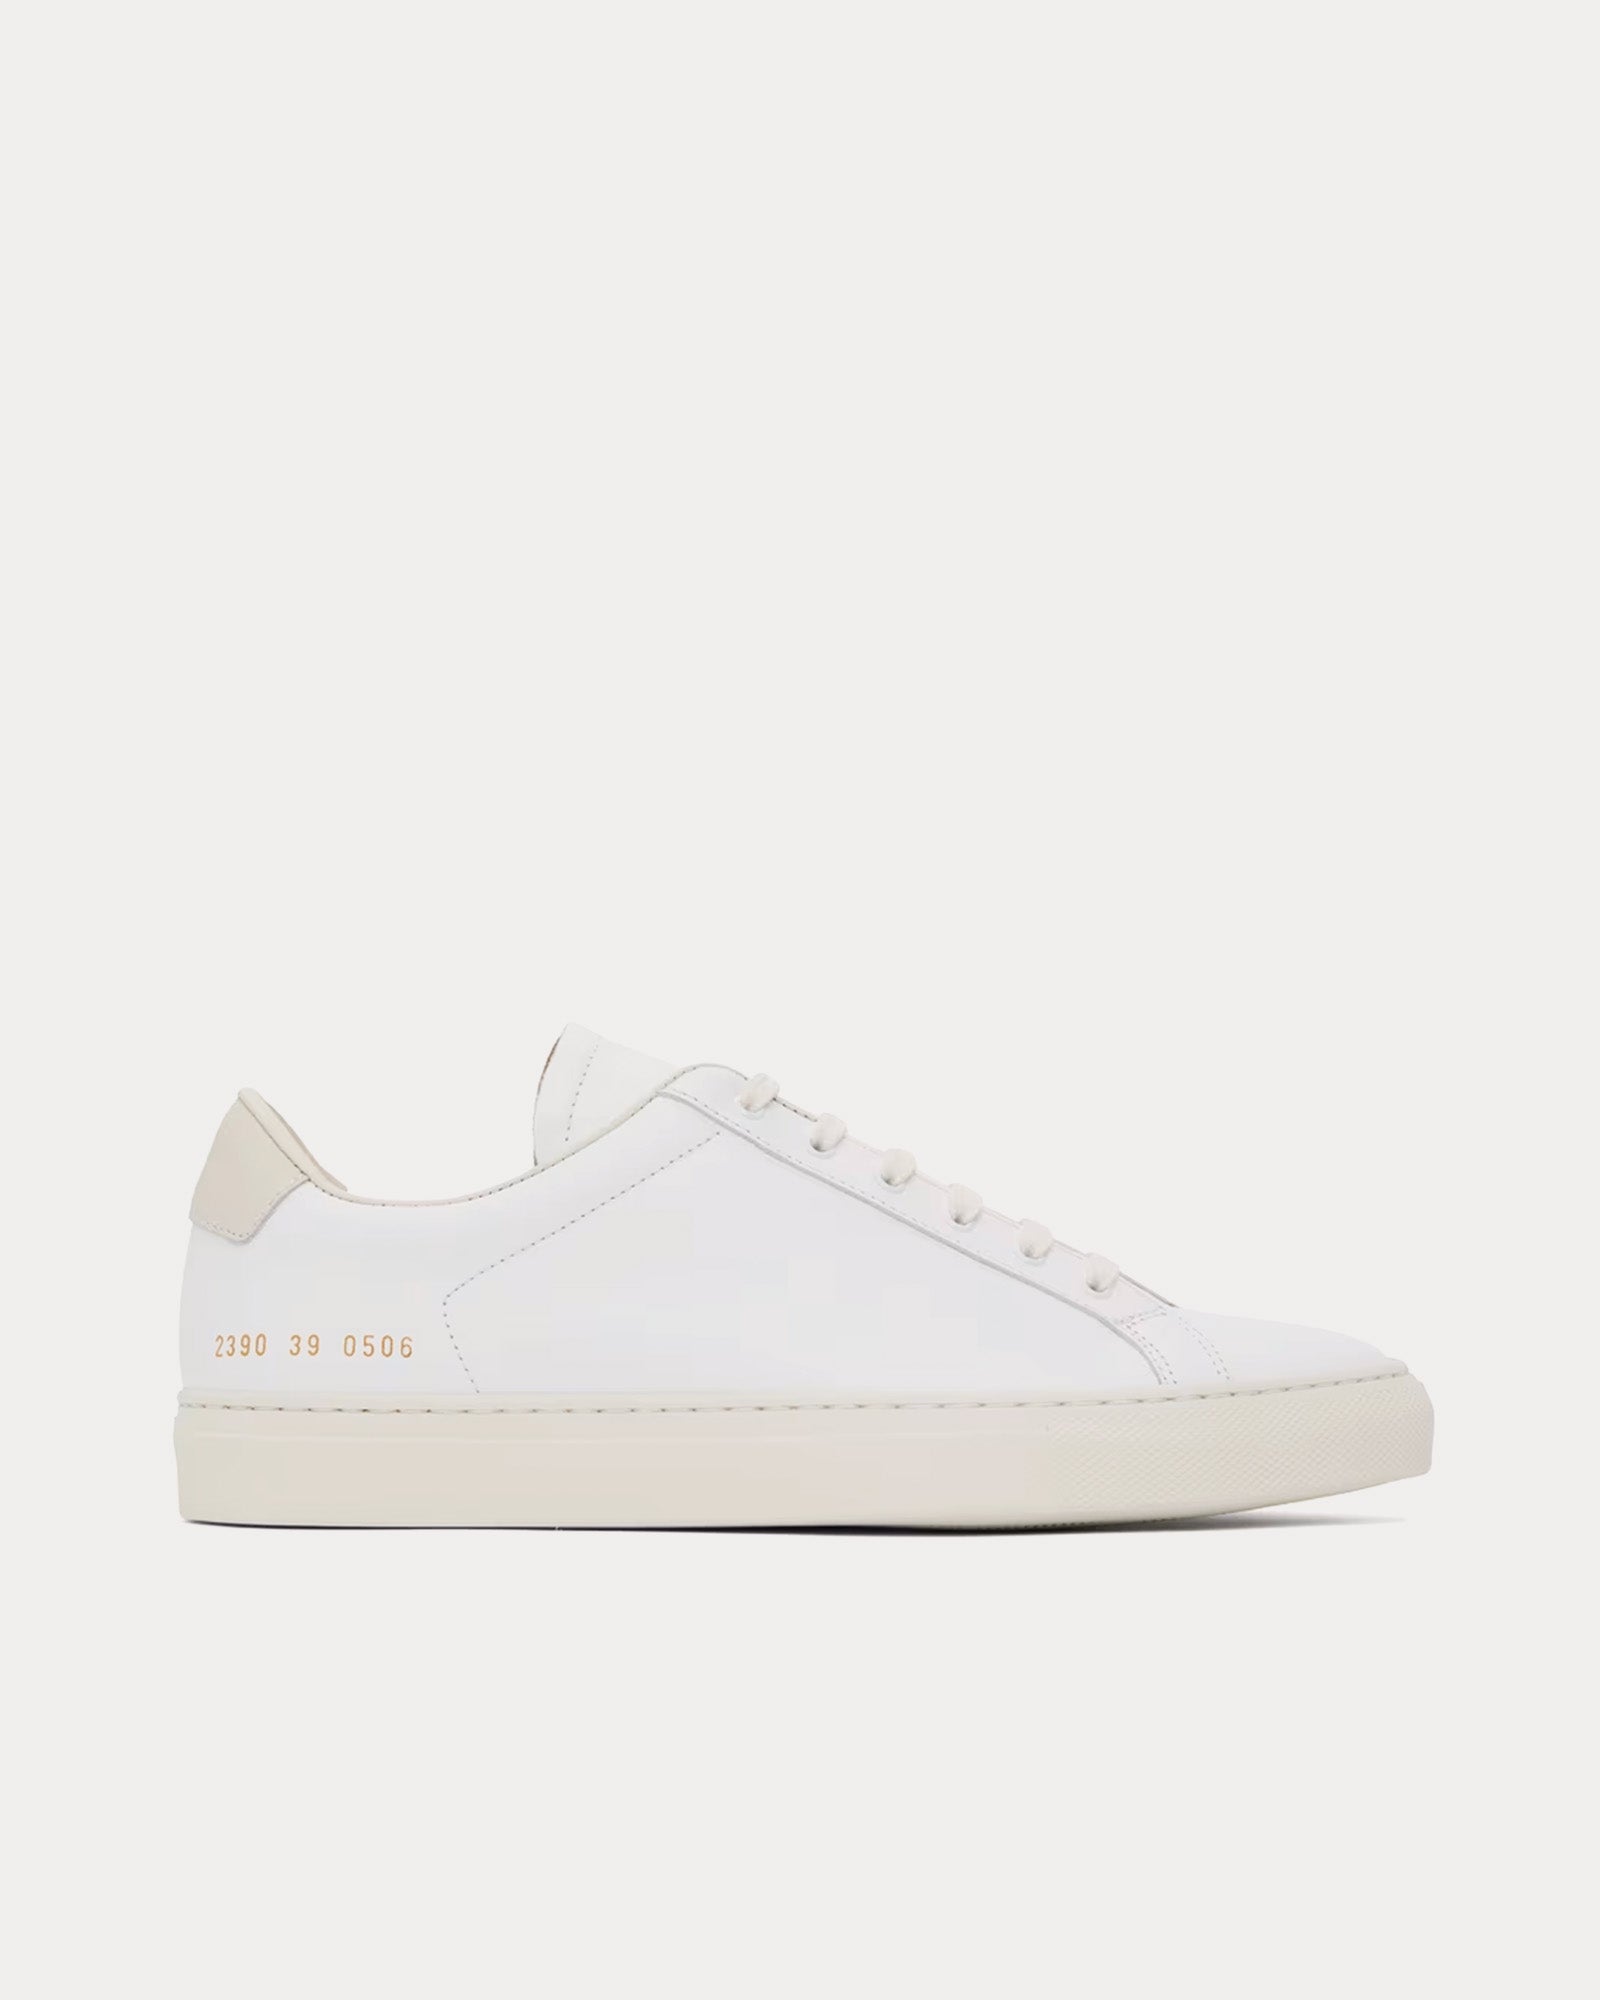 Common Projects - Retro Leather White Low Top Sneakers